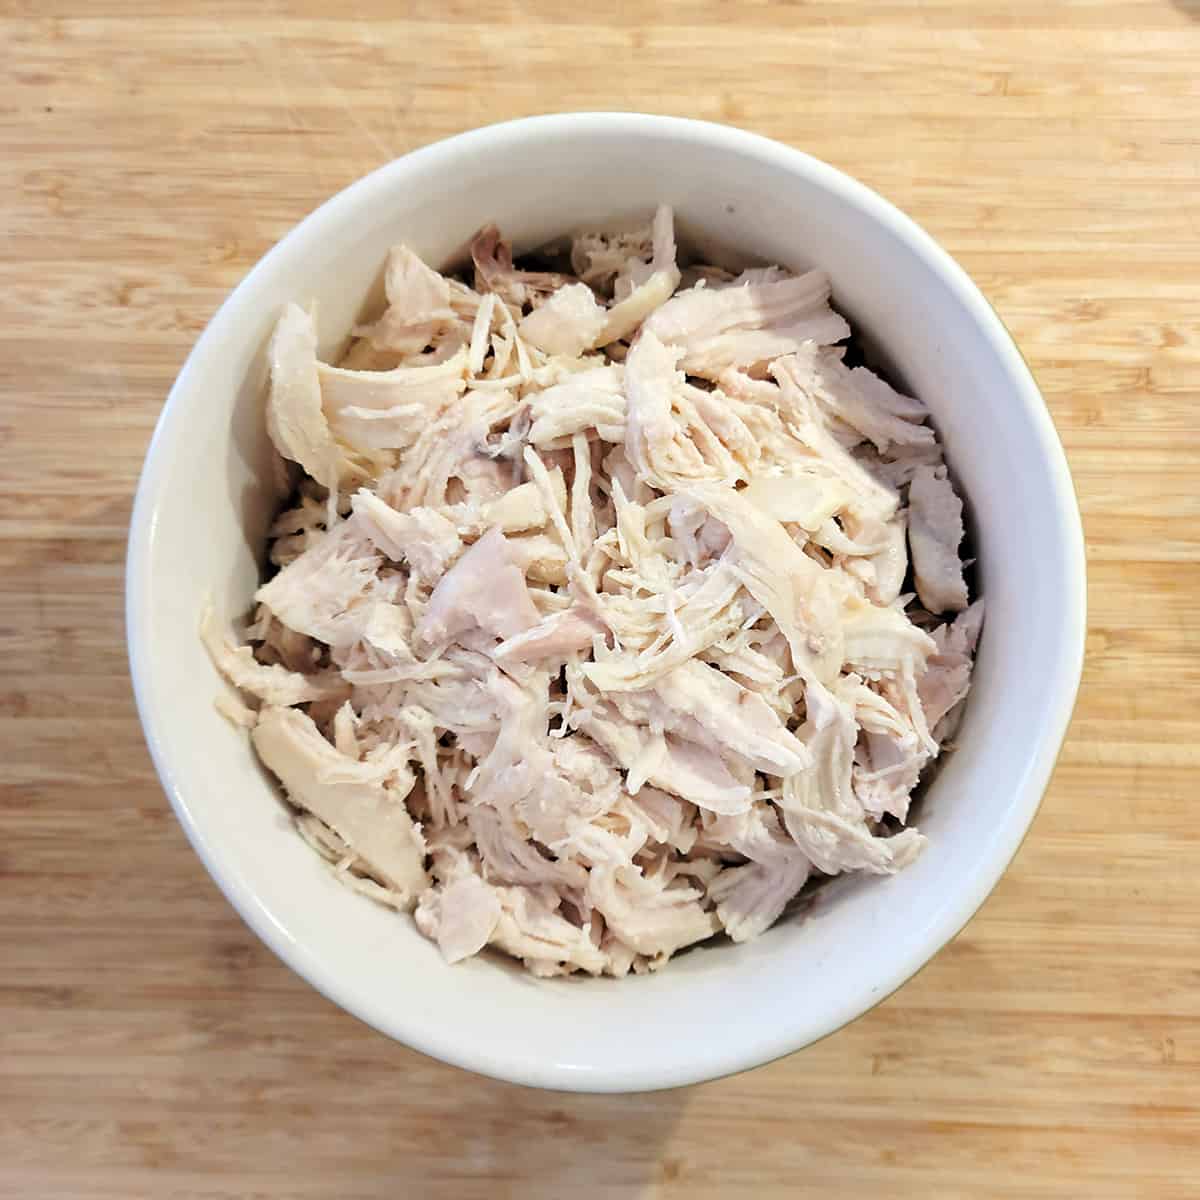 Chicken with skin and bones removed in a mixing bowl.